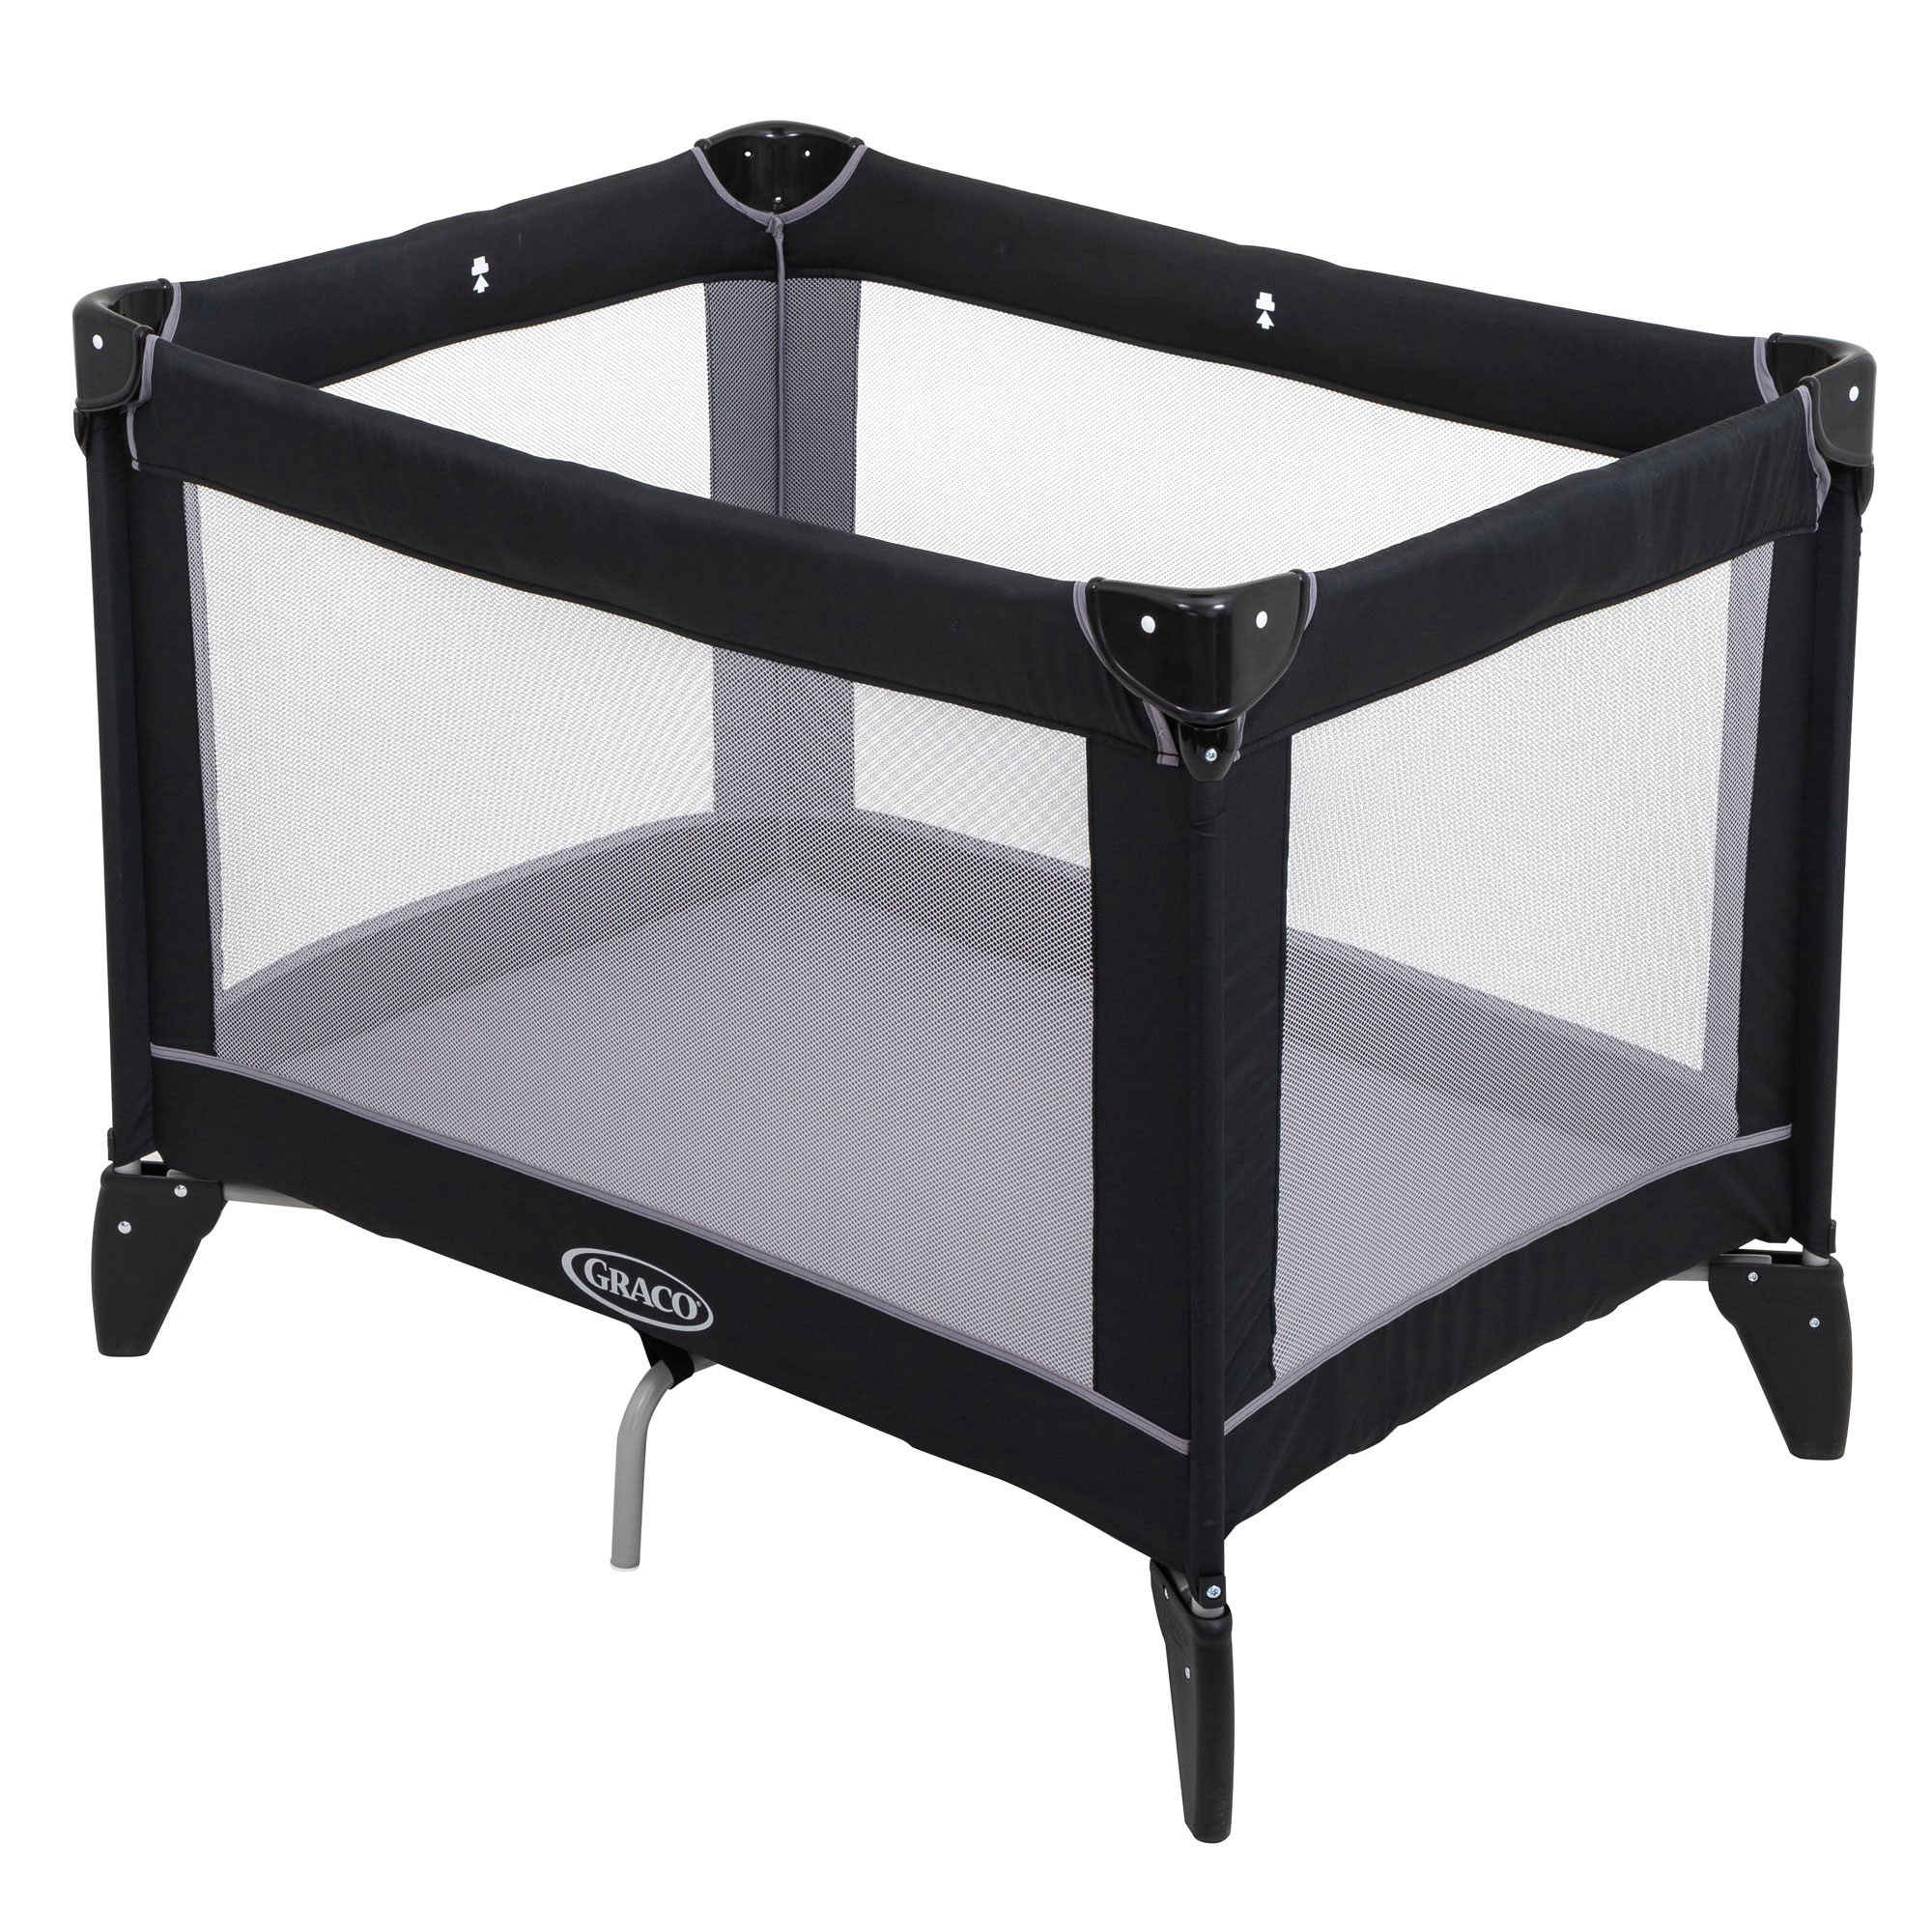 travel cot with mattress sale